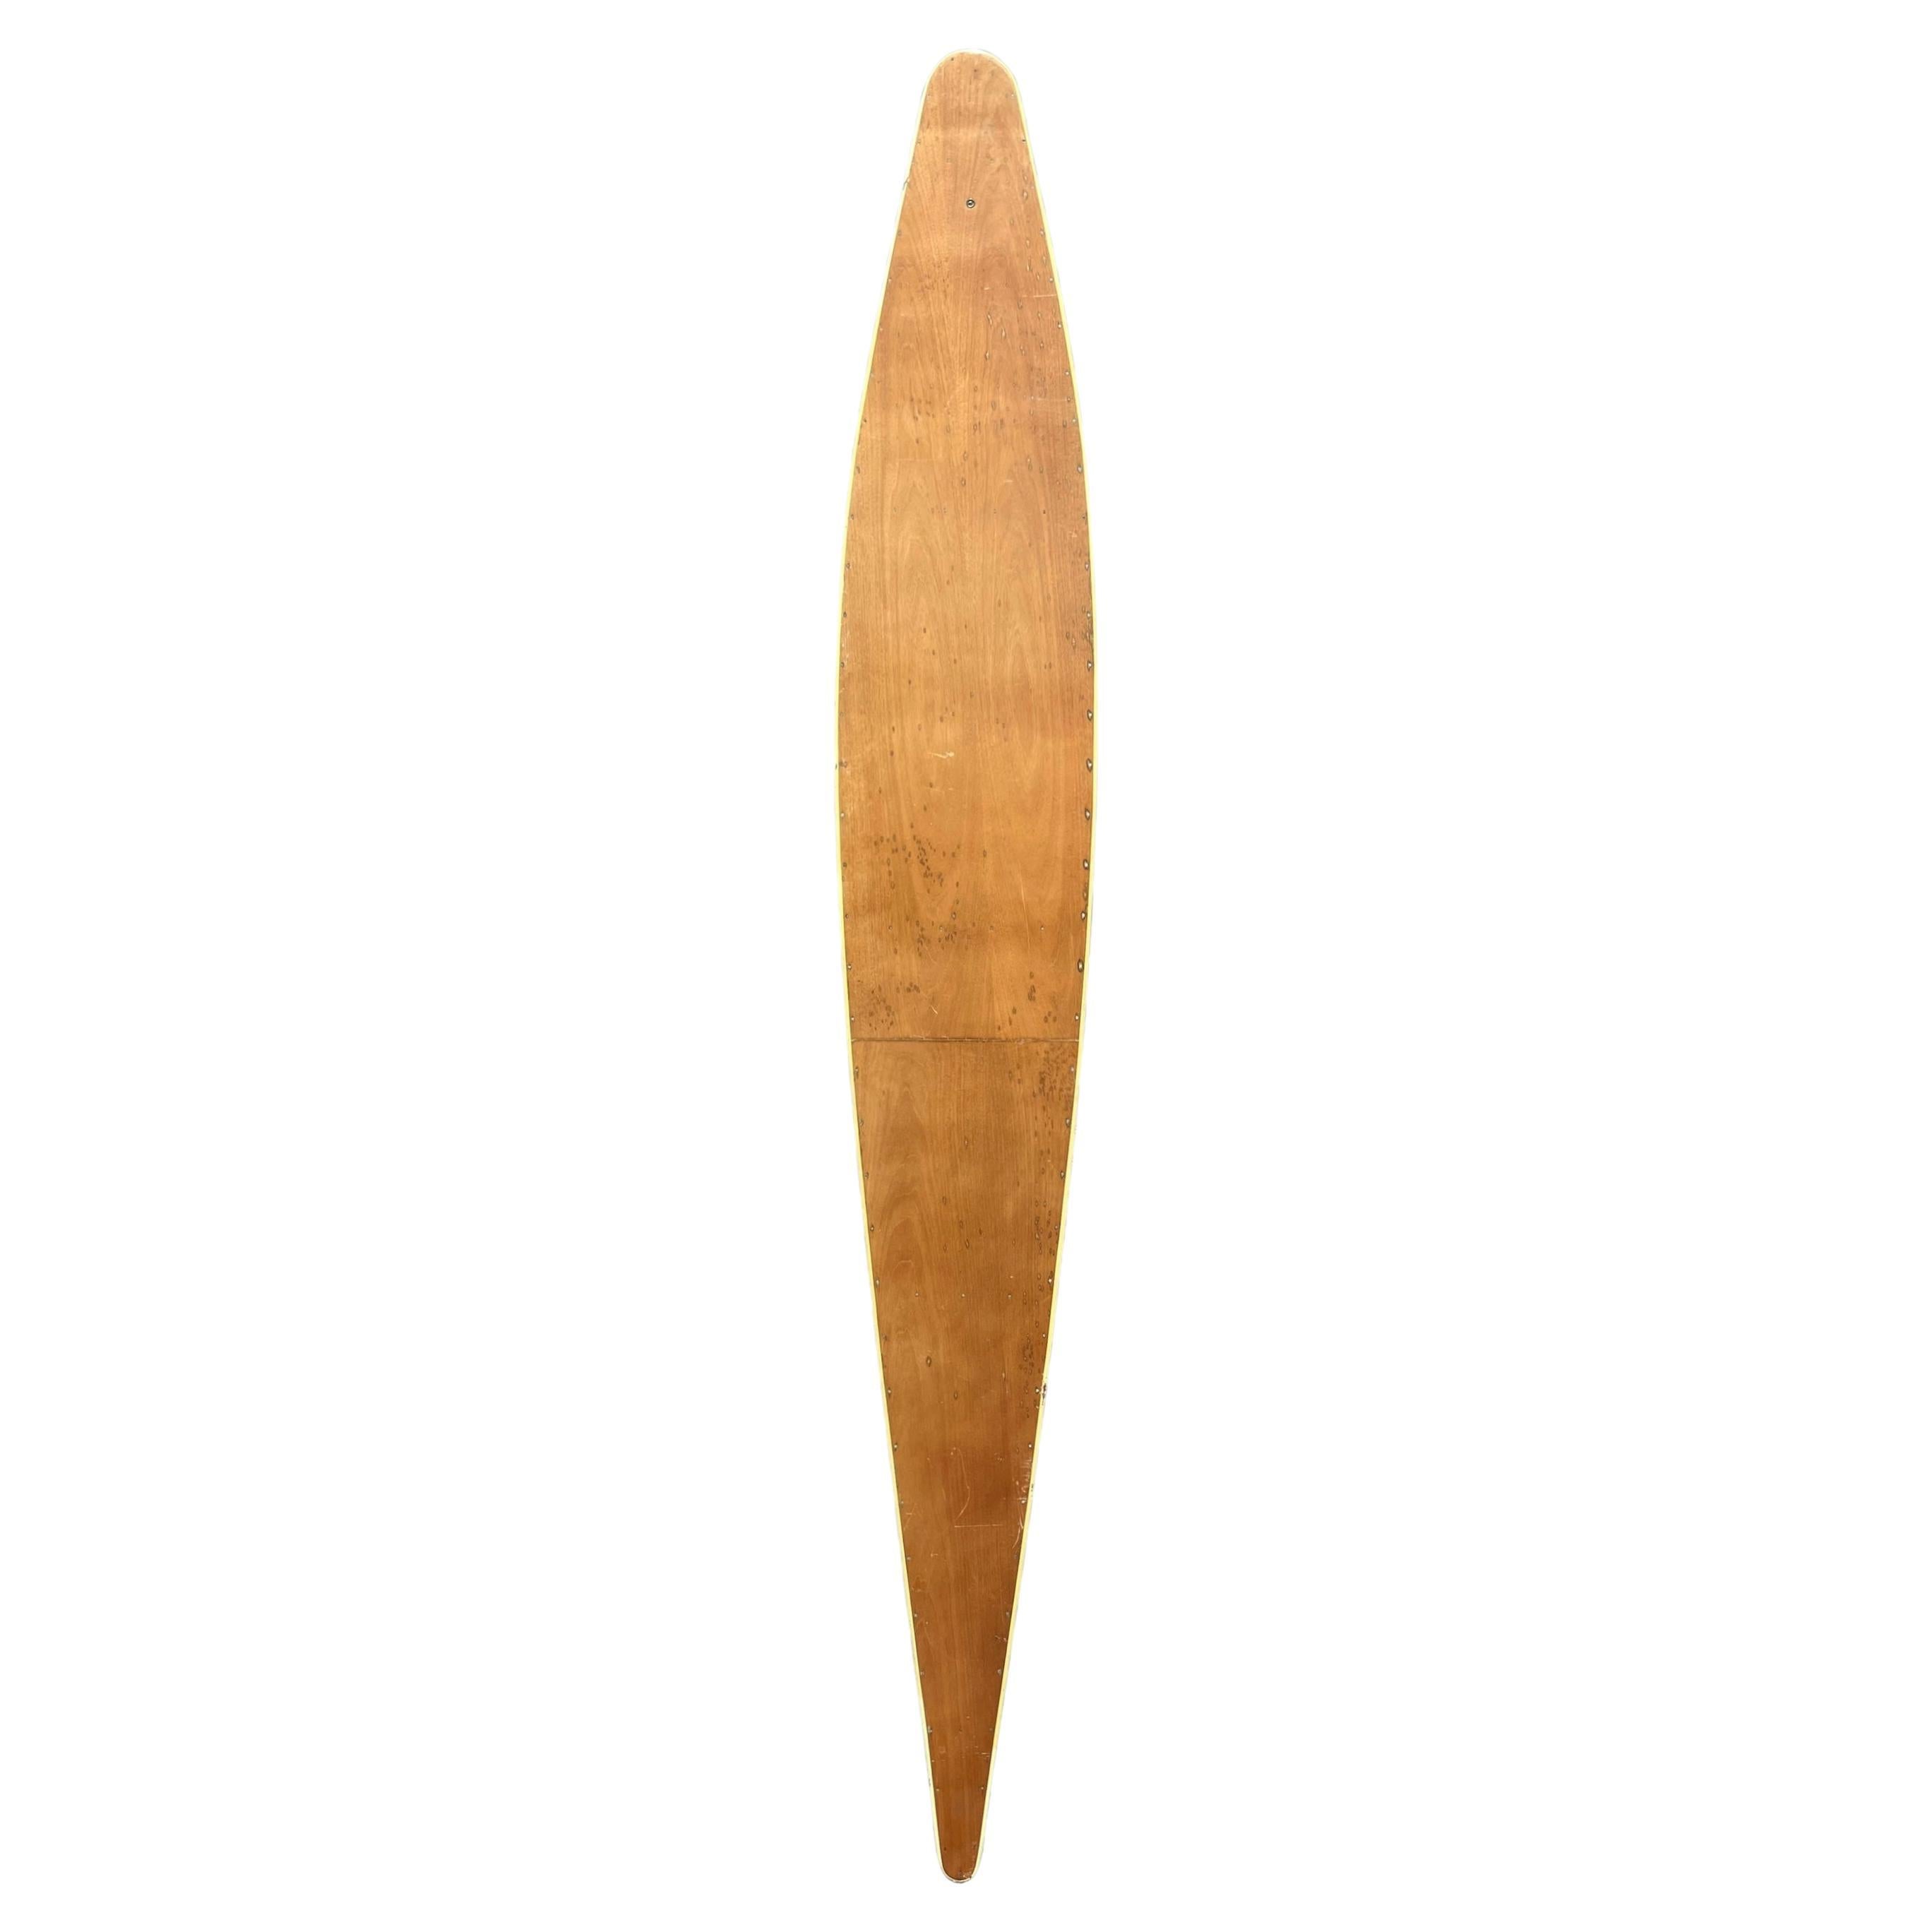 1930s Replica Tom Blake hollow wooden surfboard For Sale